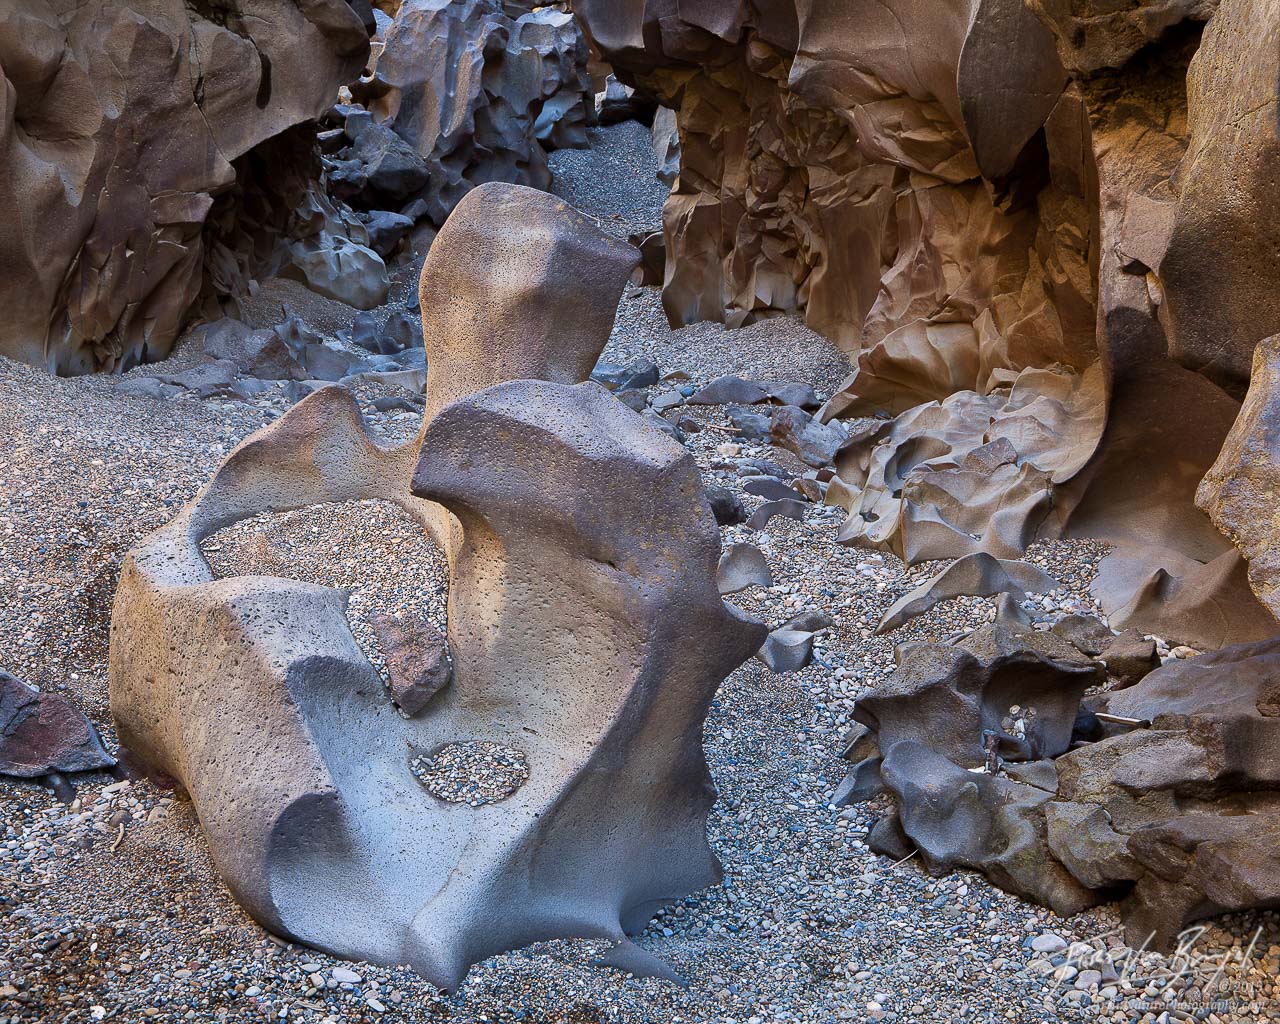 Bizzare sculptures of basalt formed through thousands of years of erosion can be found in the Snake River Valley in southern...